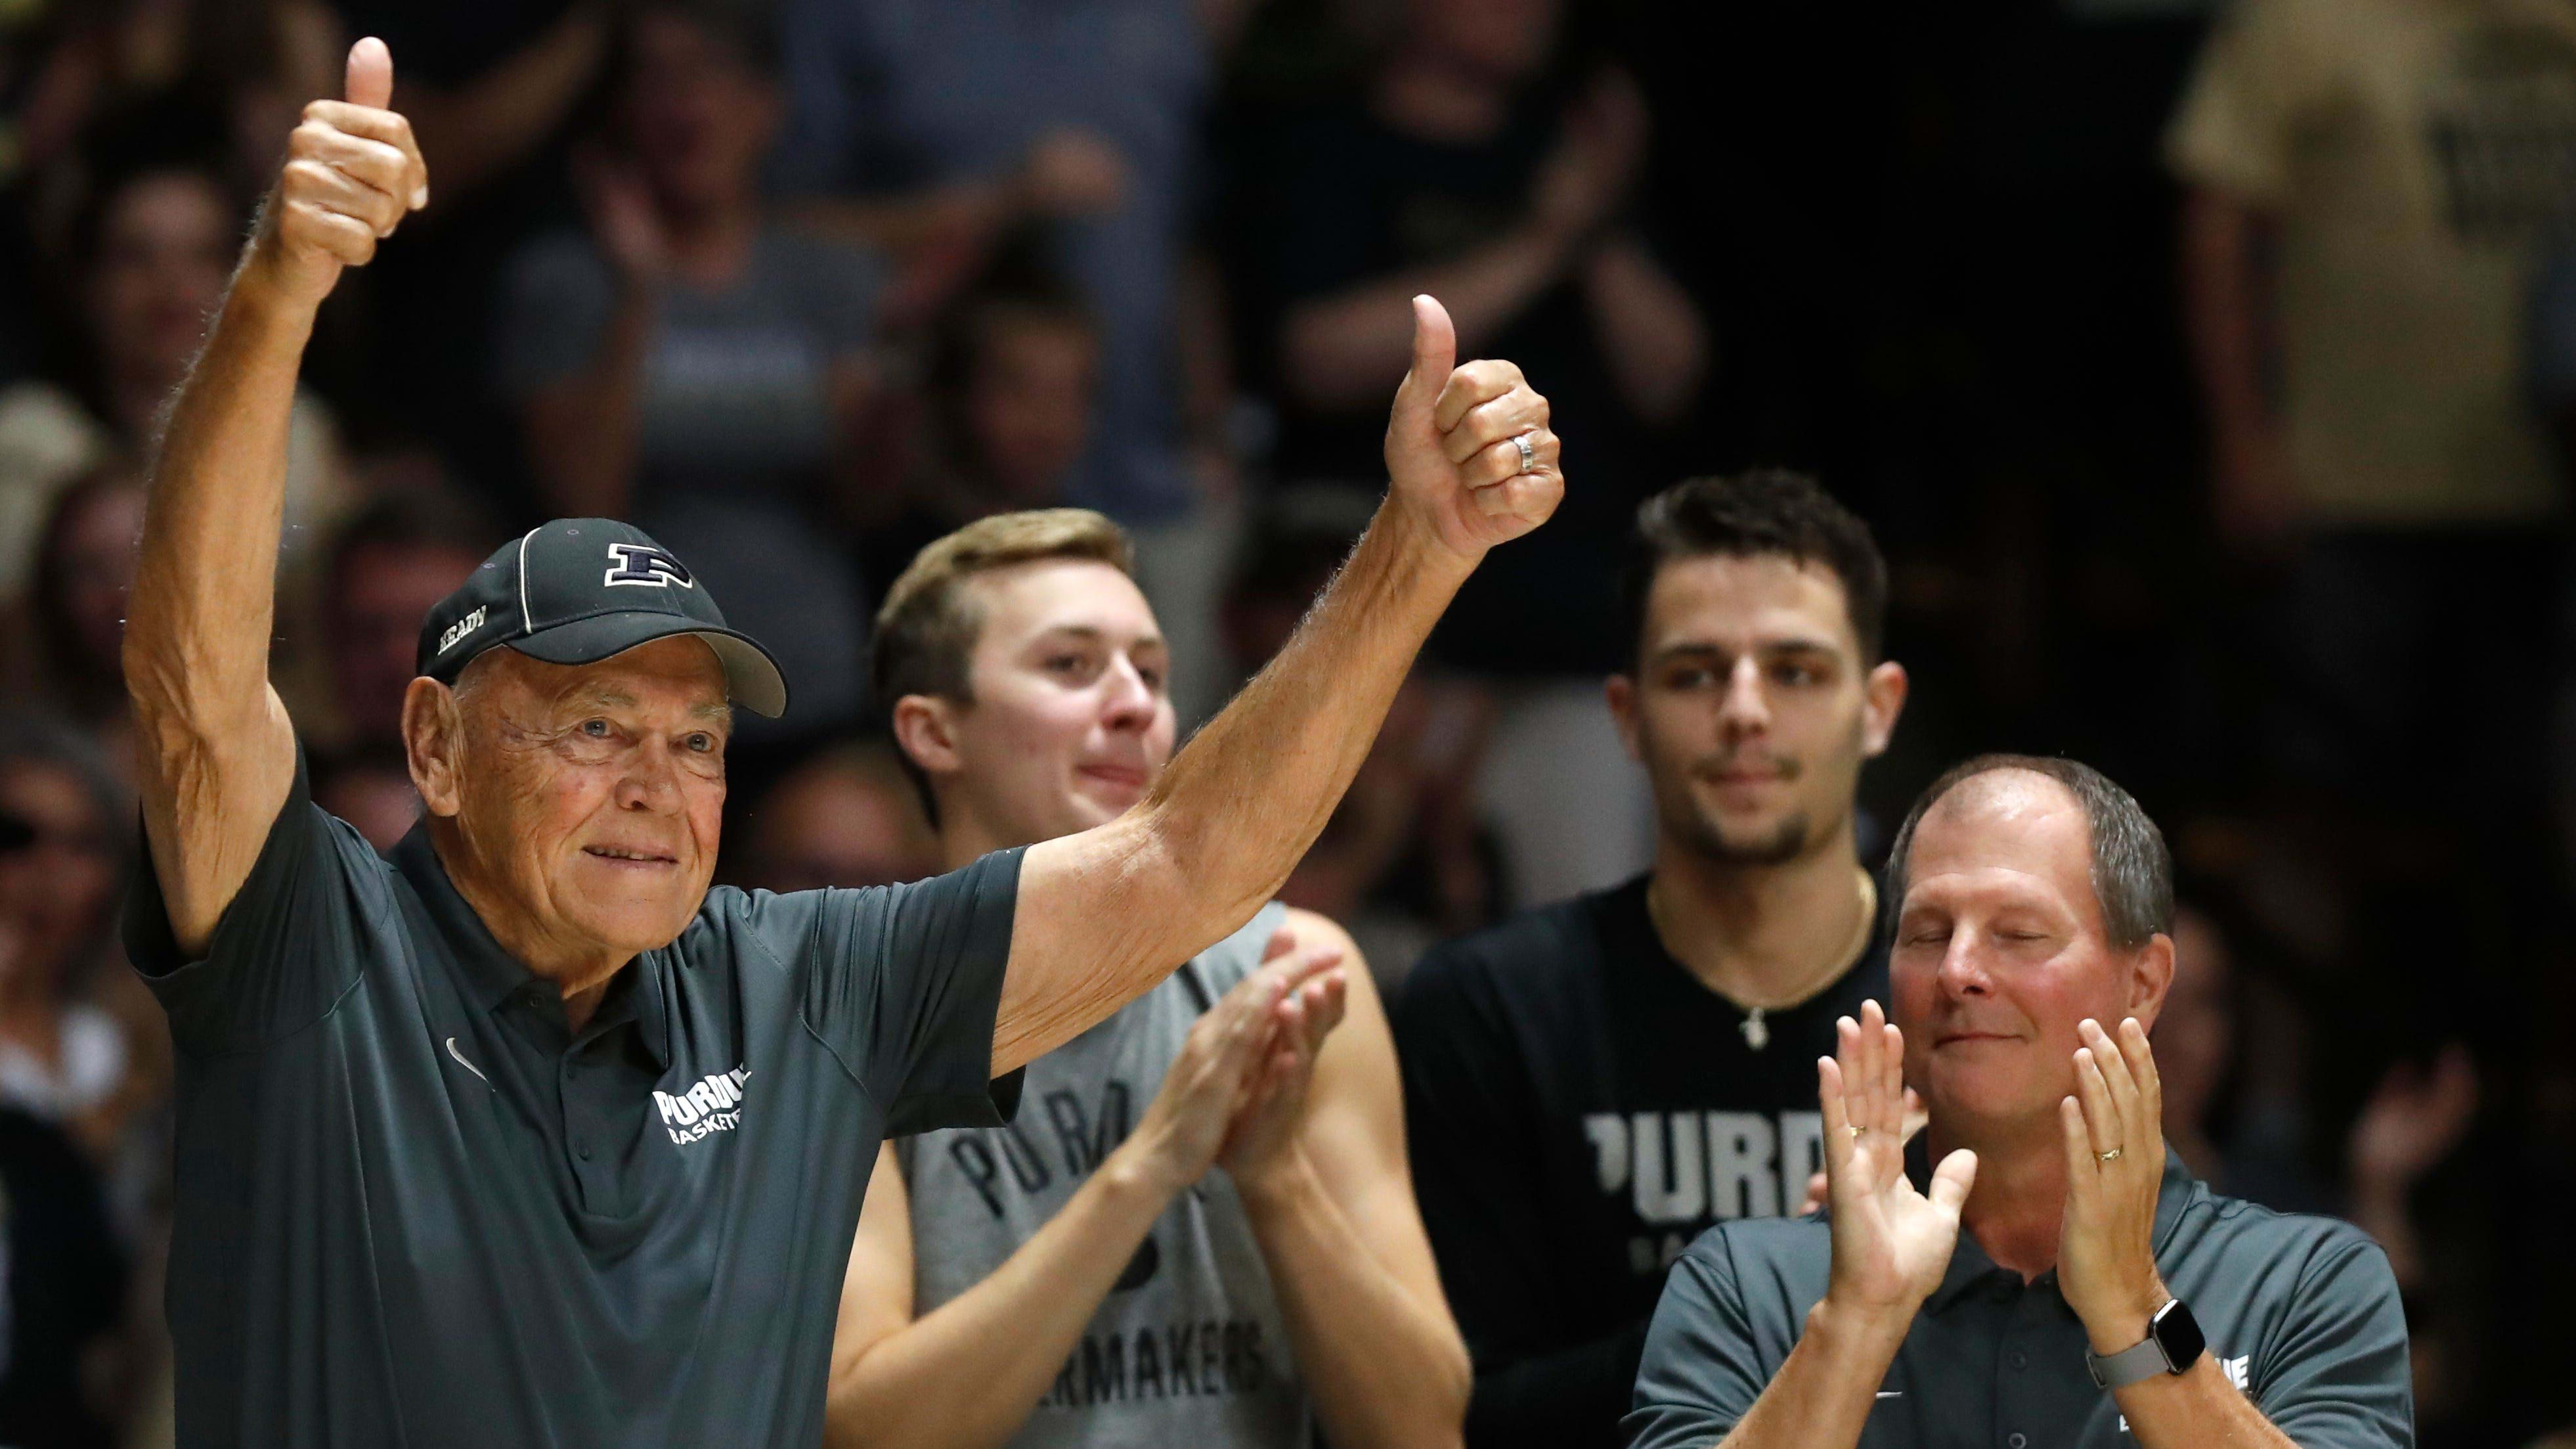 Gene Keady, Drew Brees share special moment at Final Four